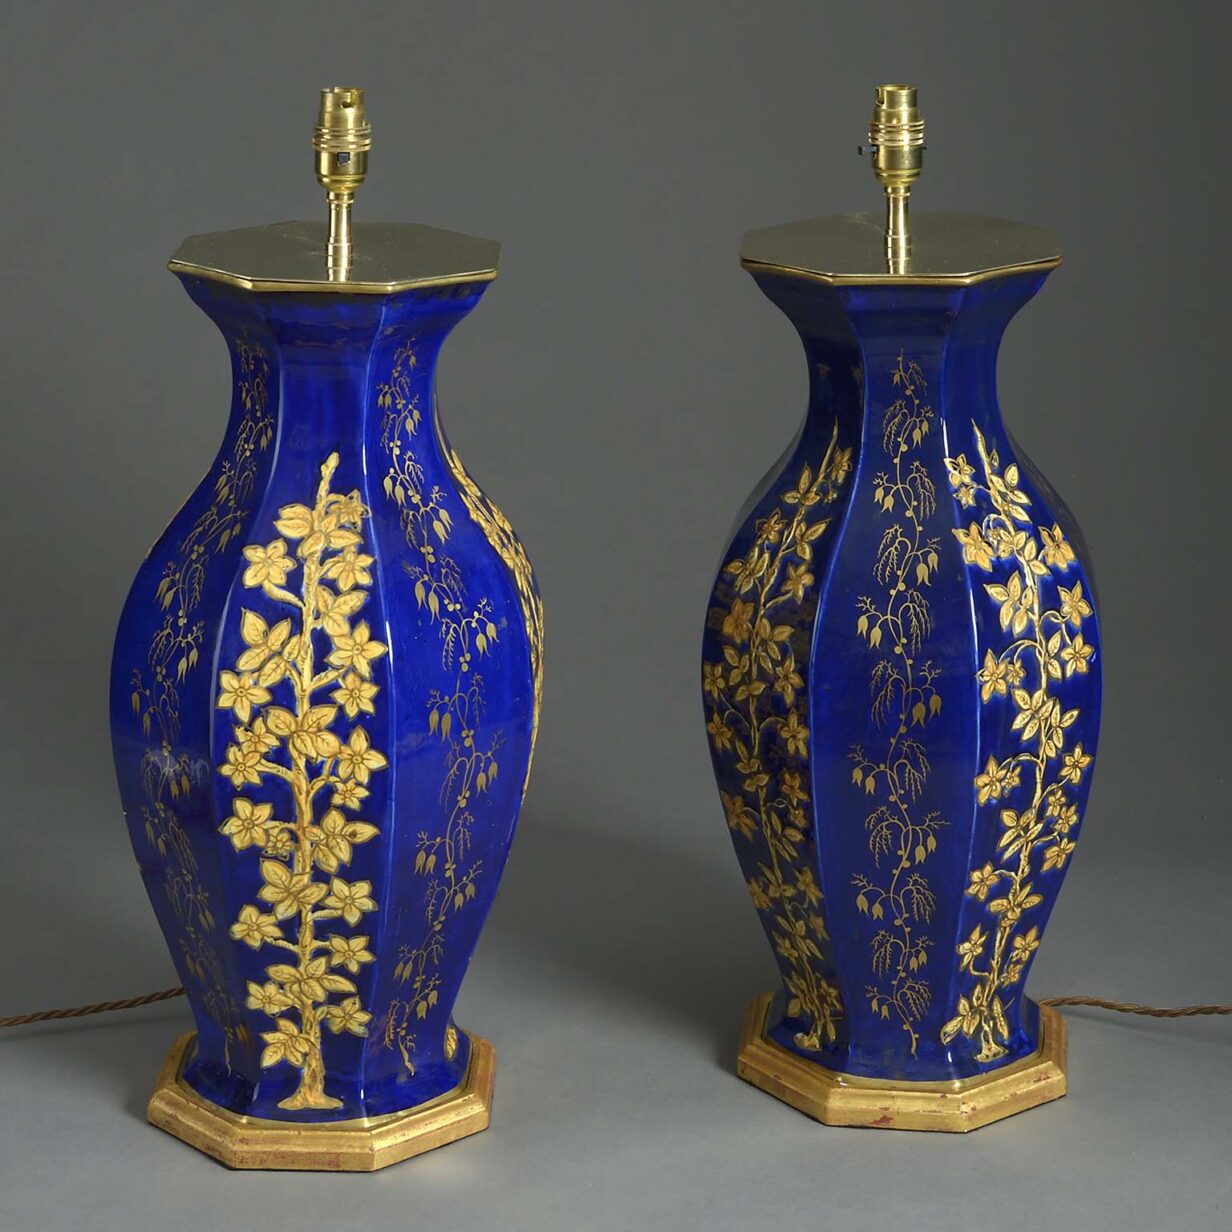 Pair of blue and yellow glazed vase lamps